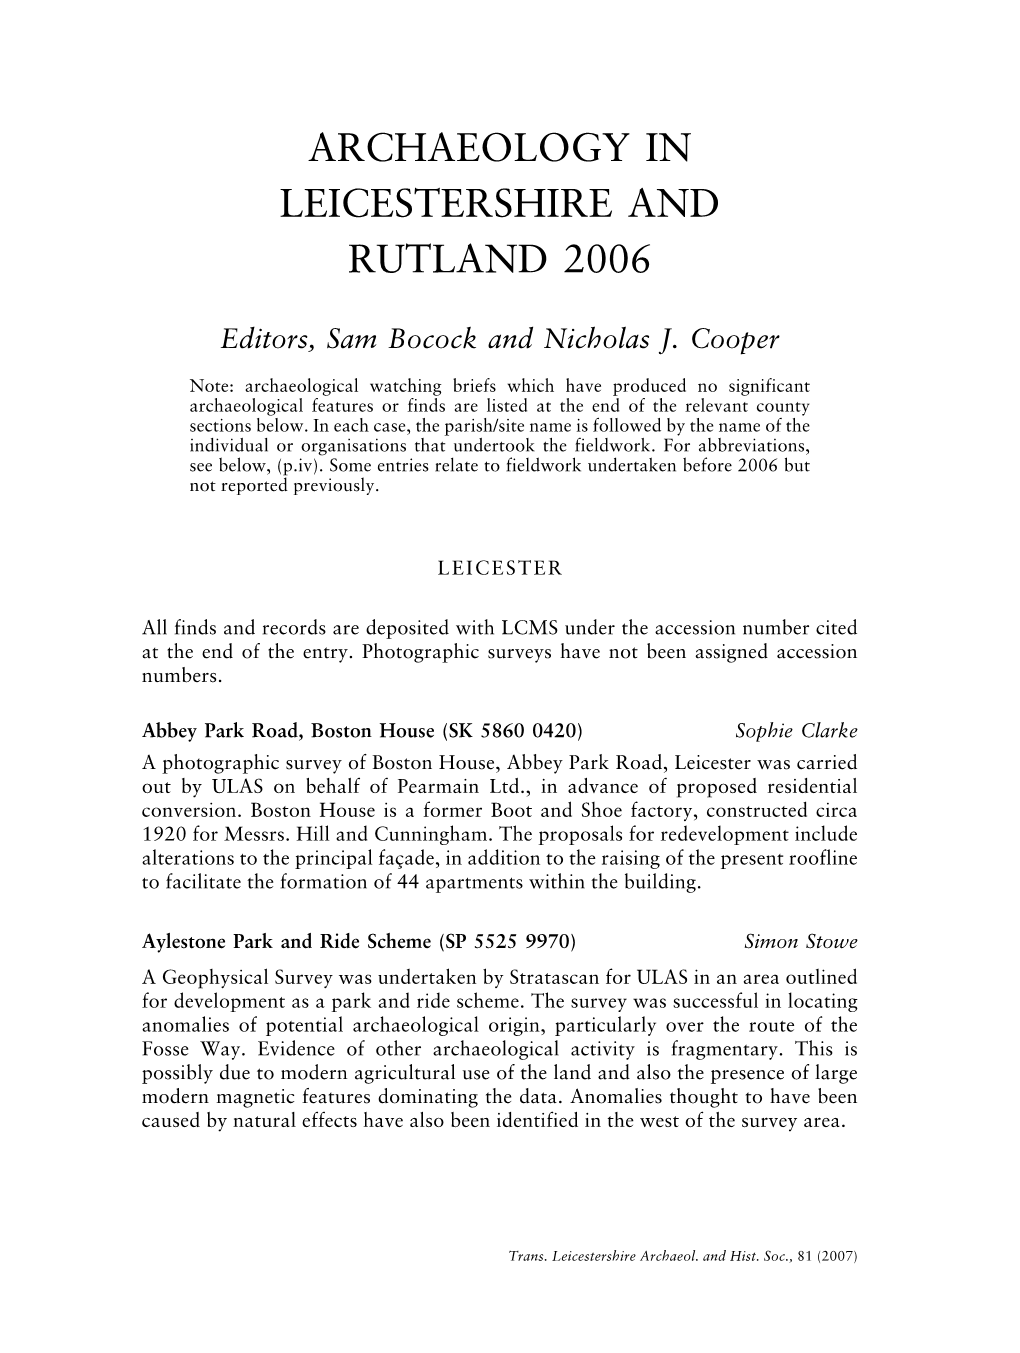 Archaeology in Leicestershire and Rutland 2006 Pp.173-235